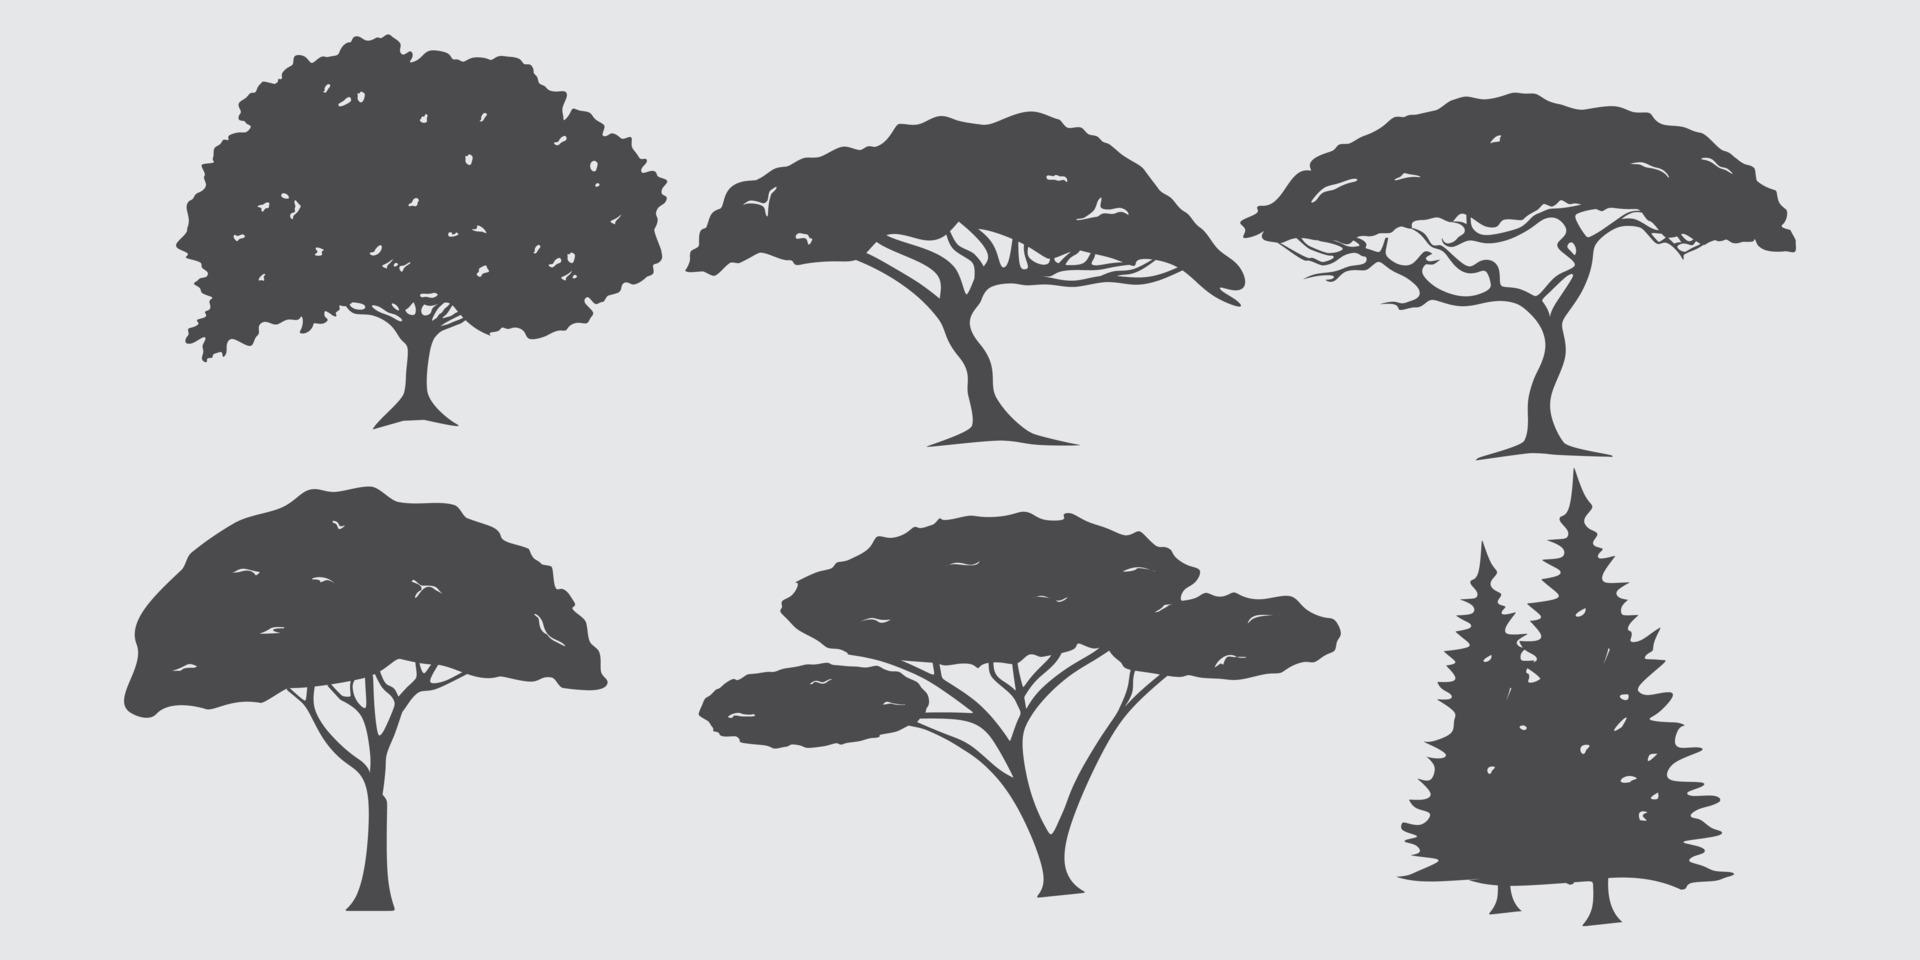 tree silhouette. vector element for nature theme illustration.